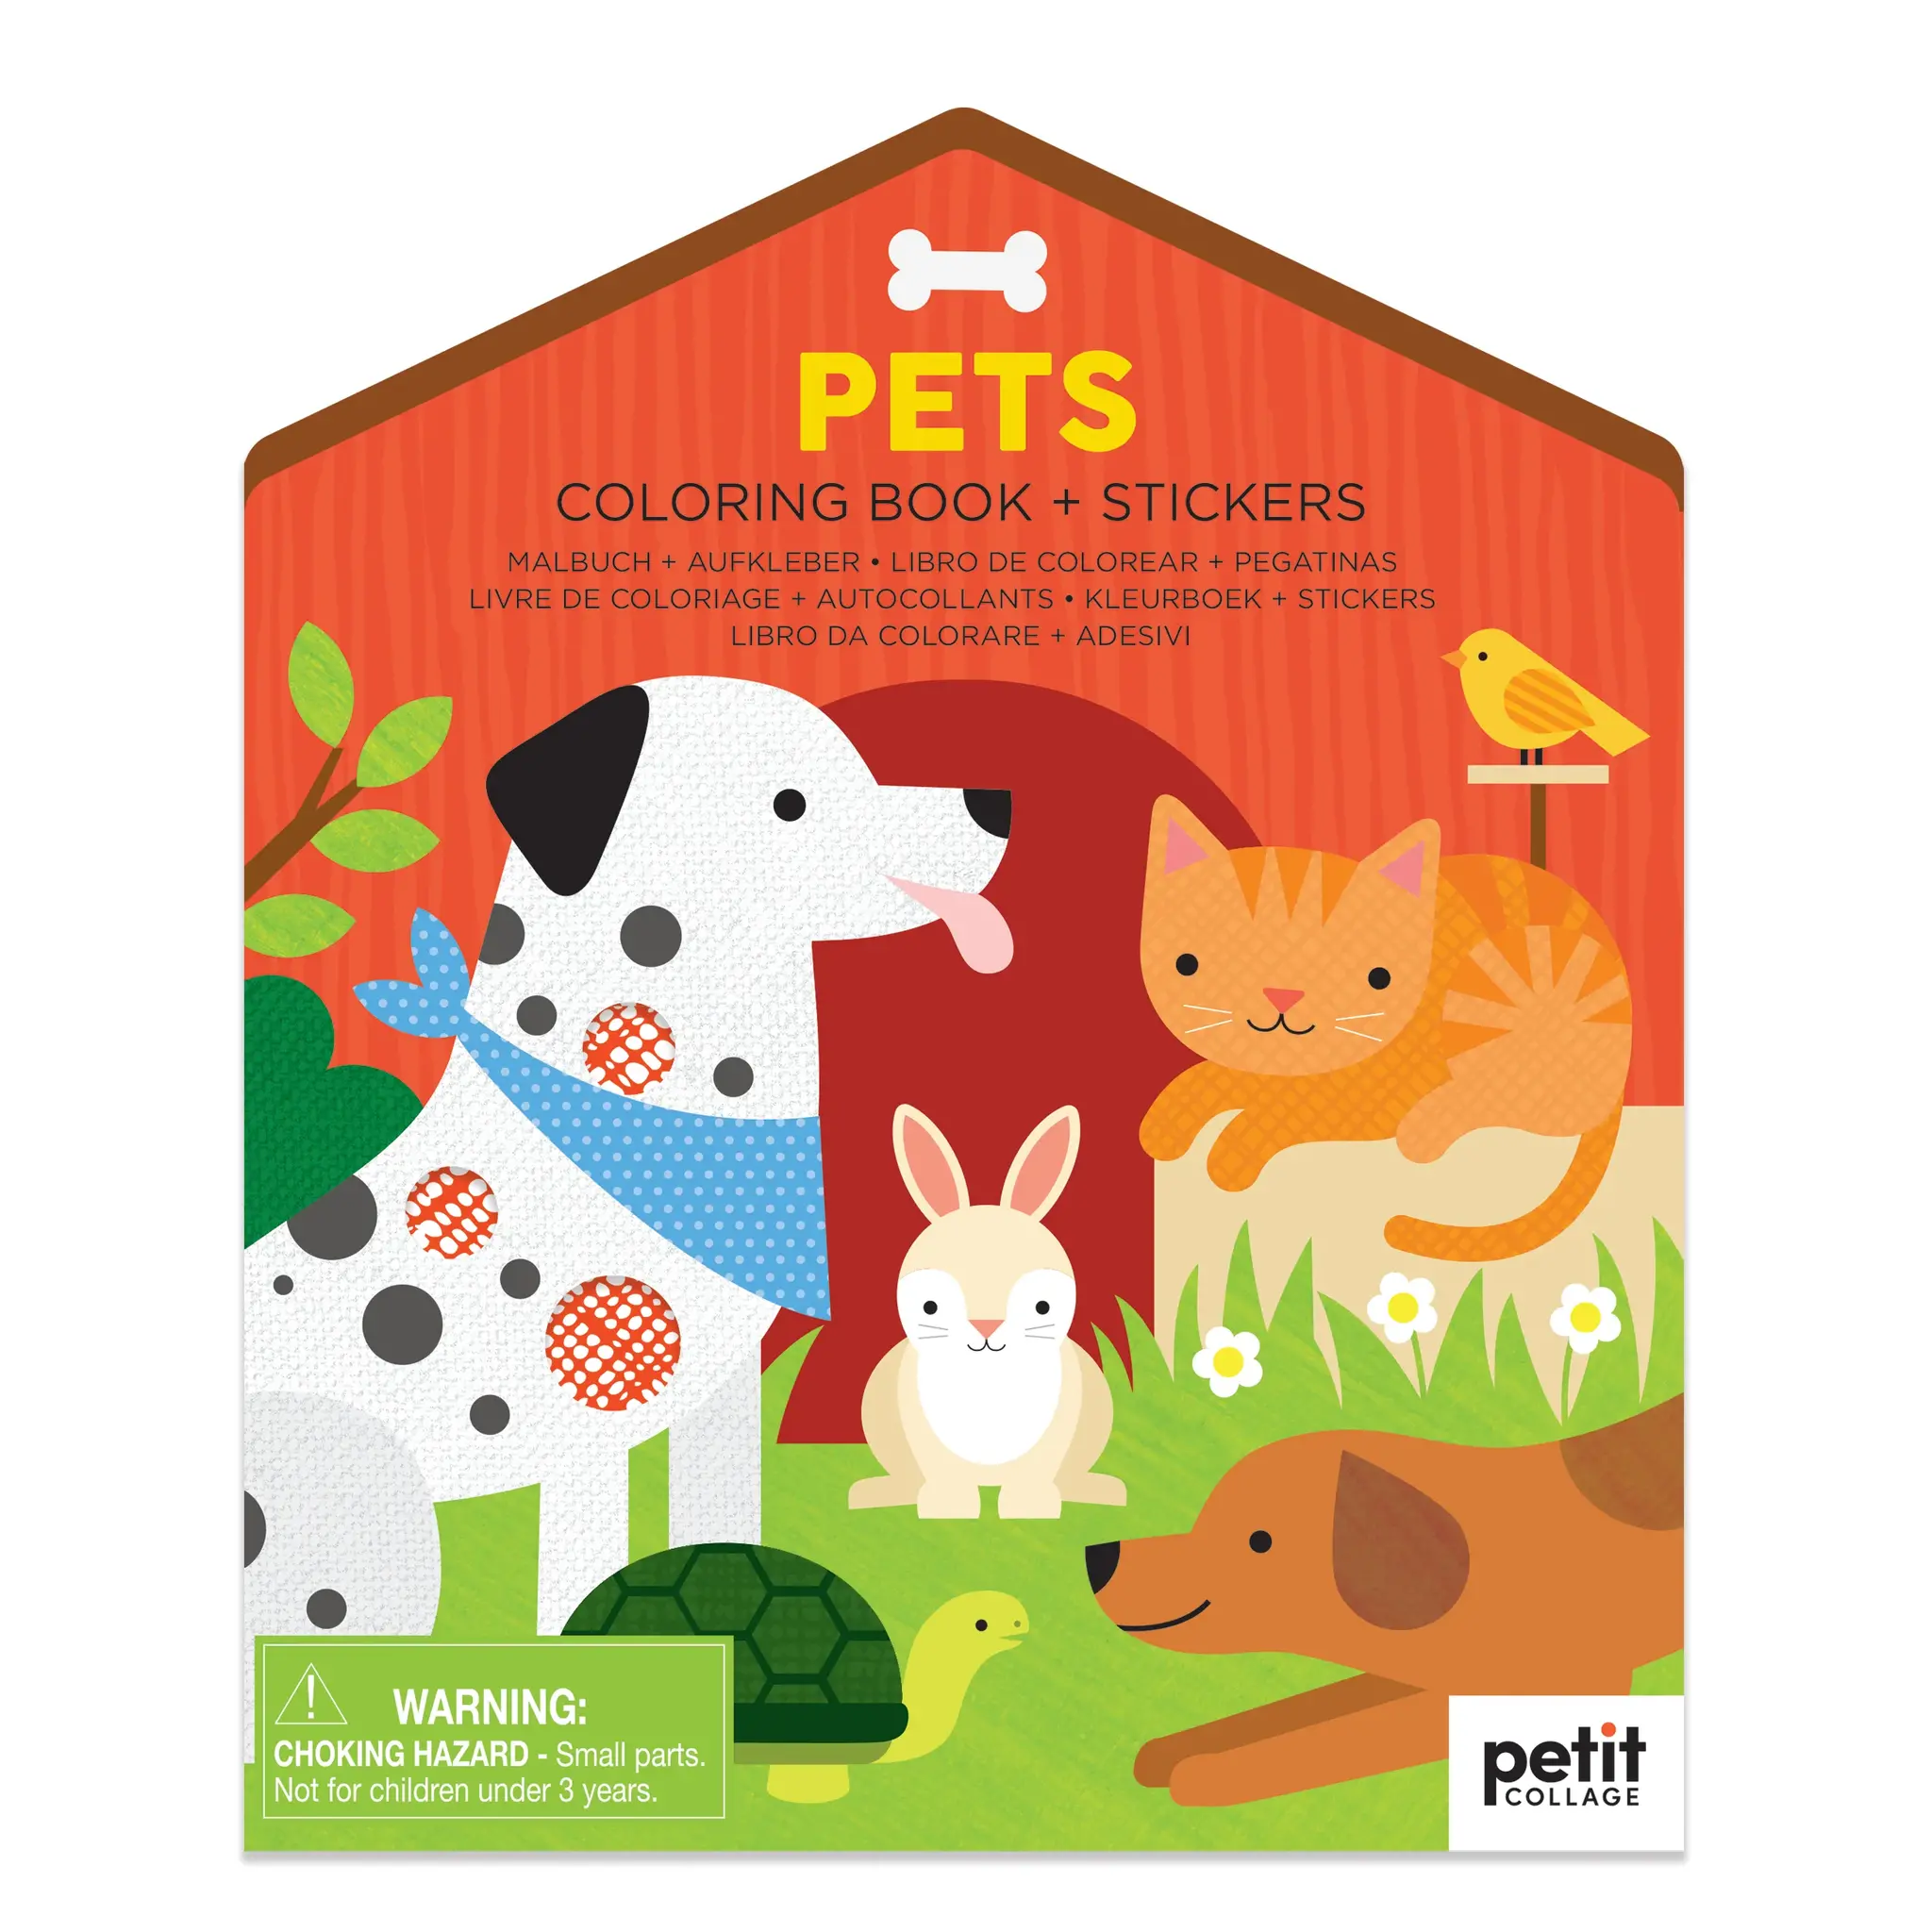 hachette book group Pets Coloring Book and Stickers